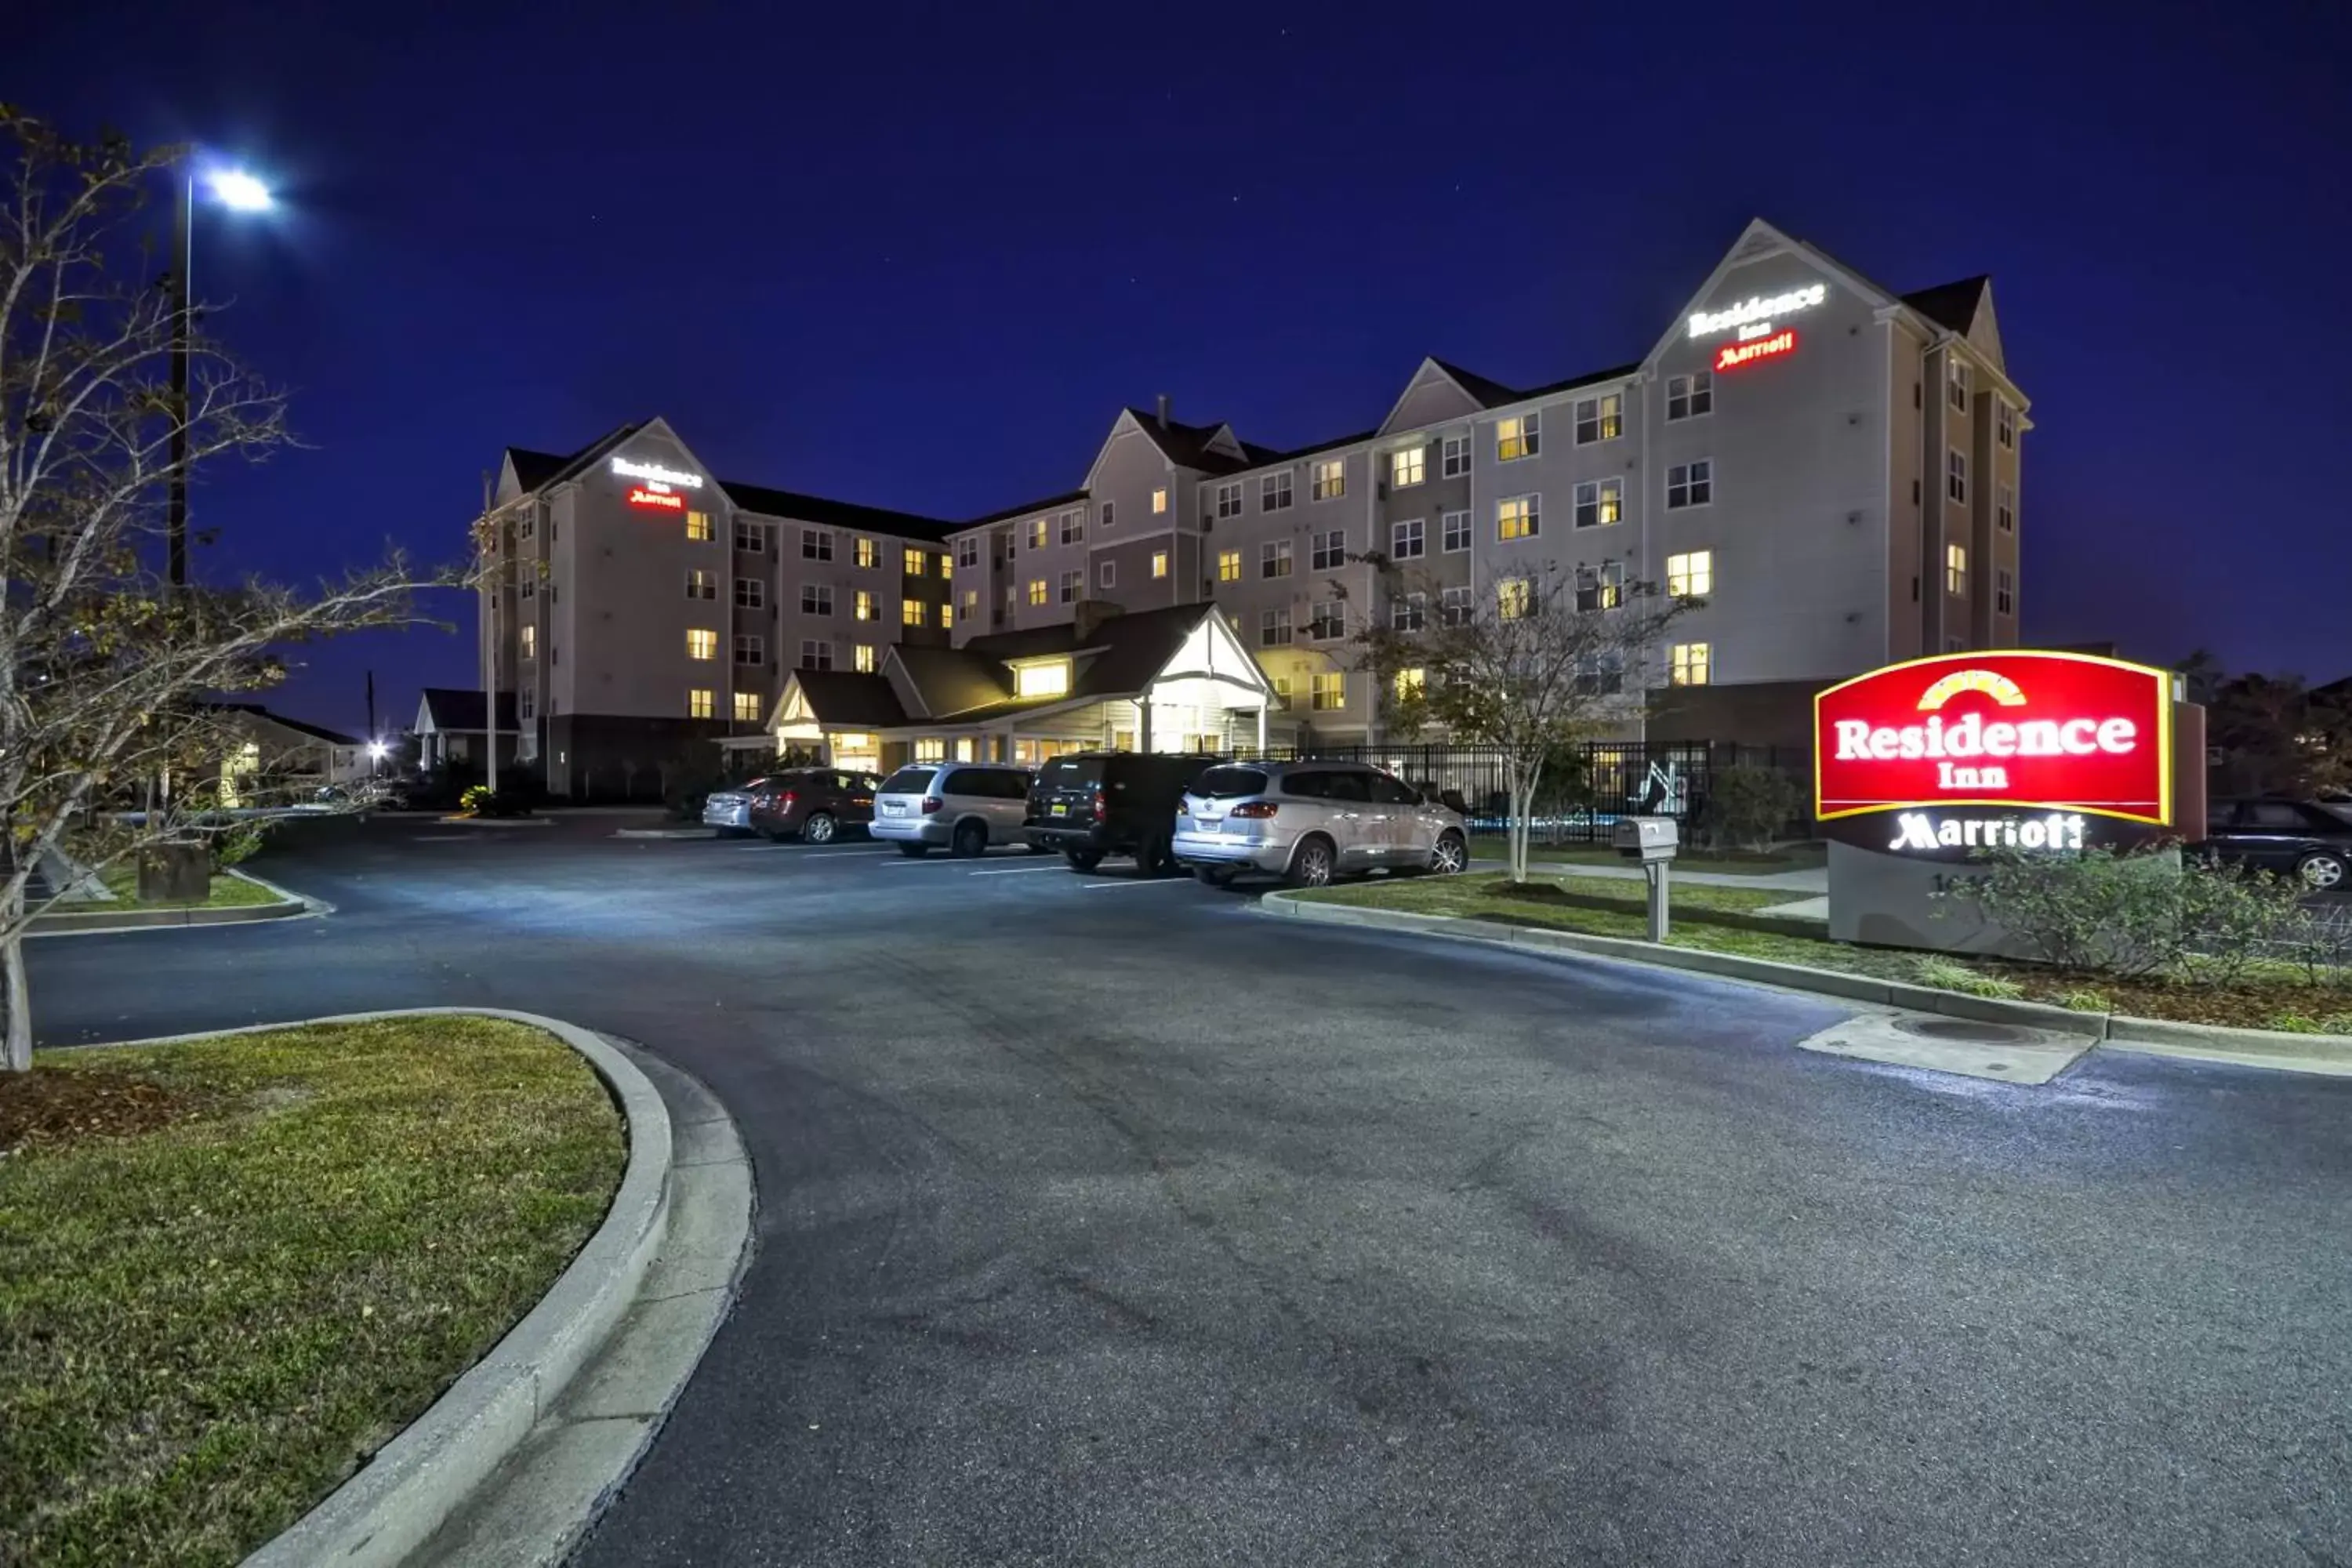 Property Building in Residence Inn by Marriott Gulfport-Biloxi Airport